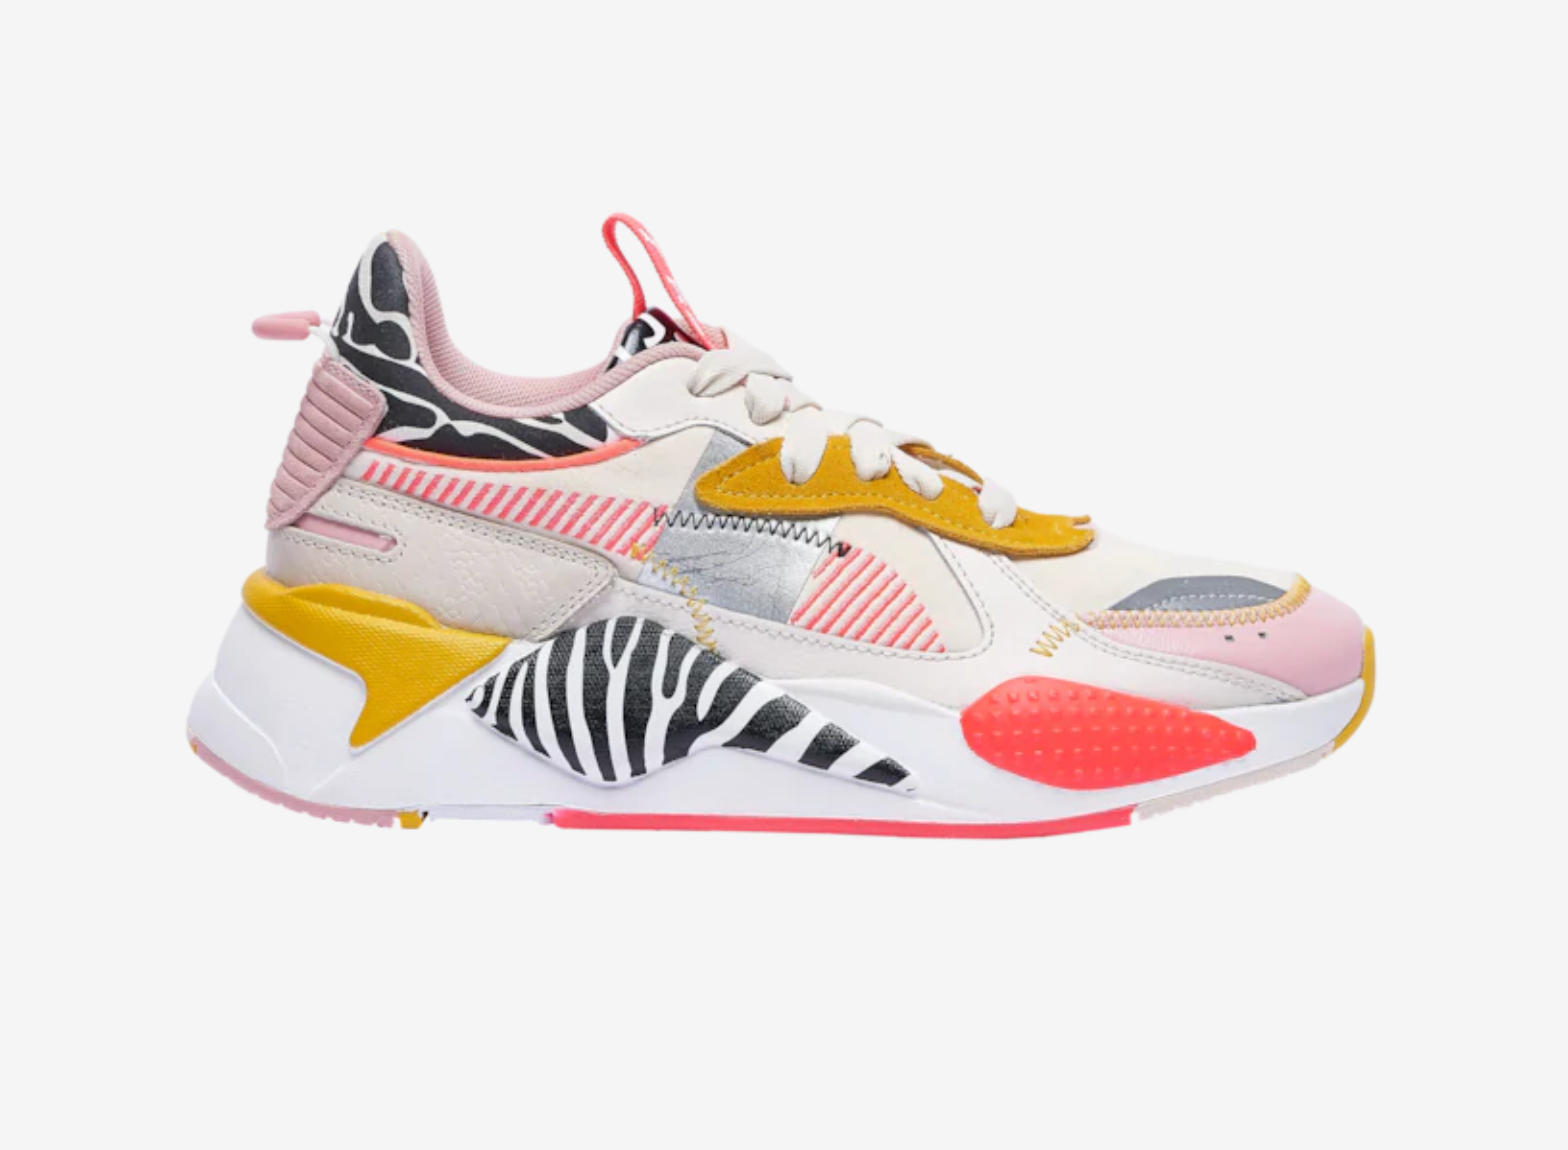 WOMENS PUMA RS-X UNEXPECTED MIX - Multi 